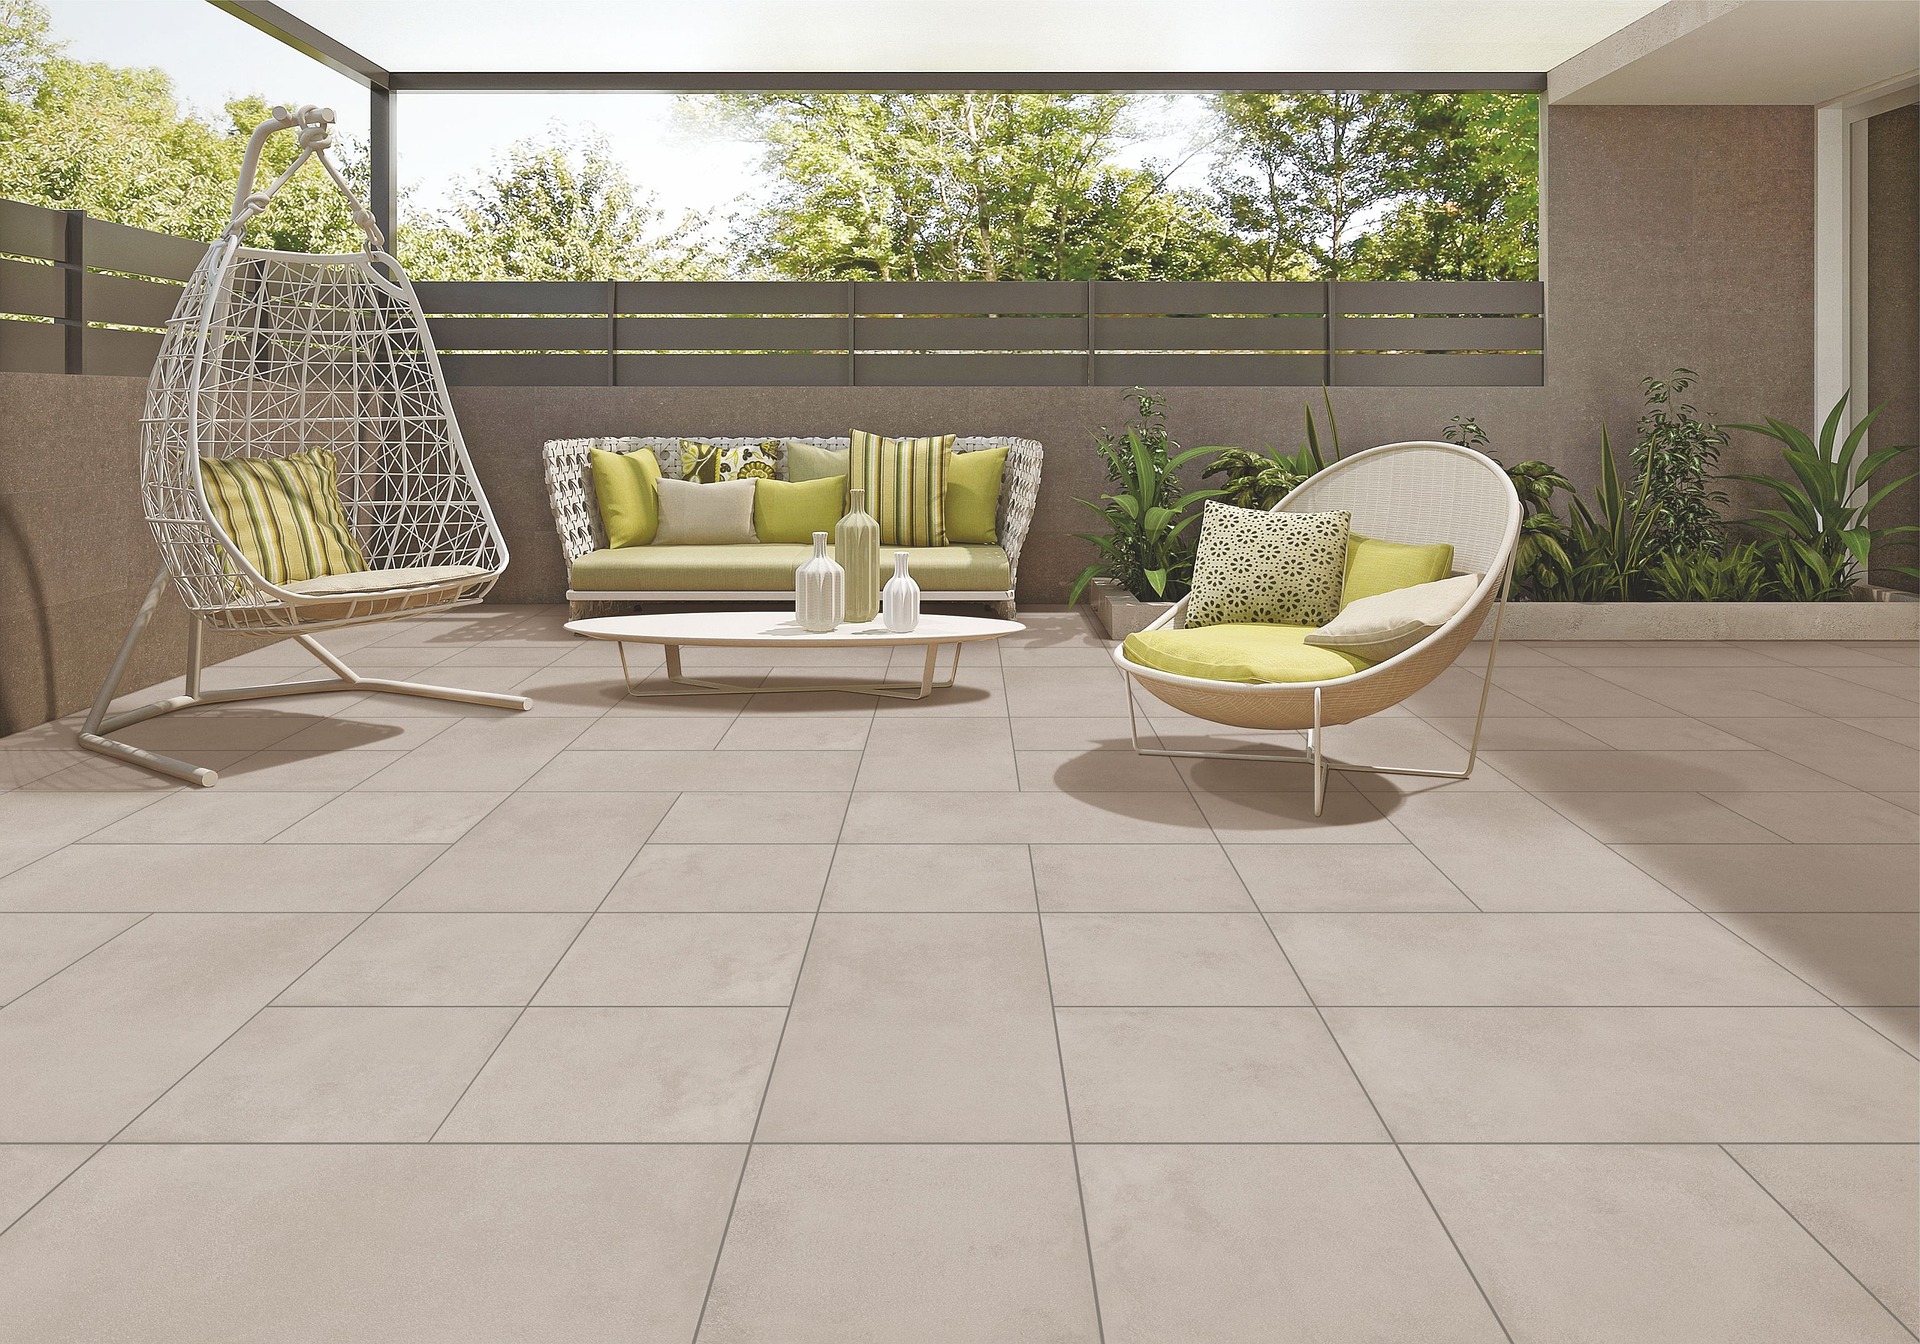 Is Porcelain Tile Good for Outdoor Patios?